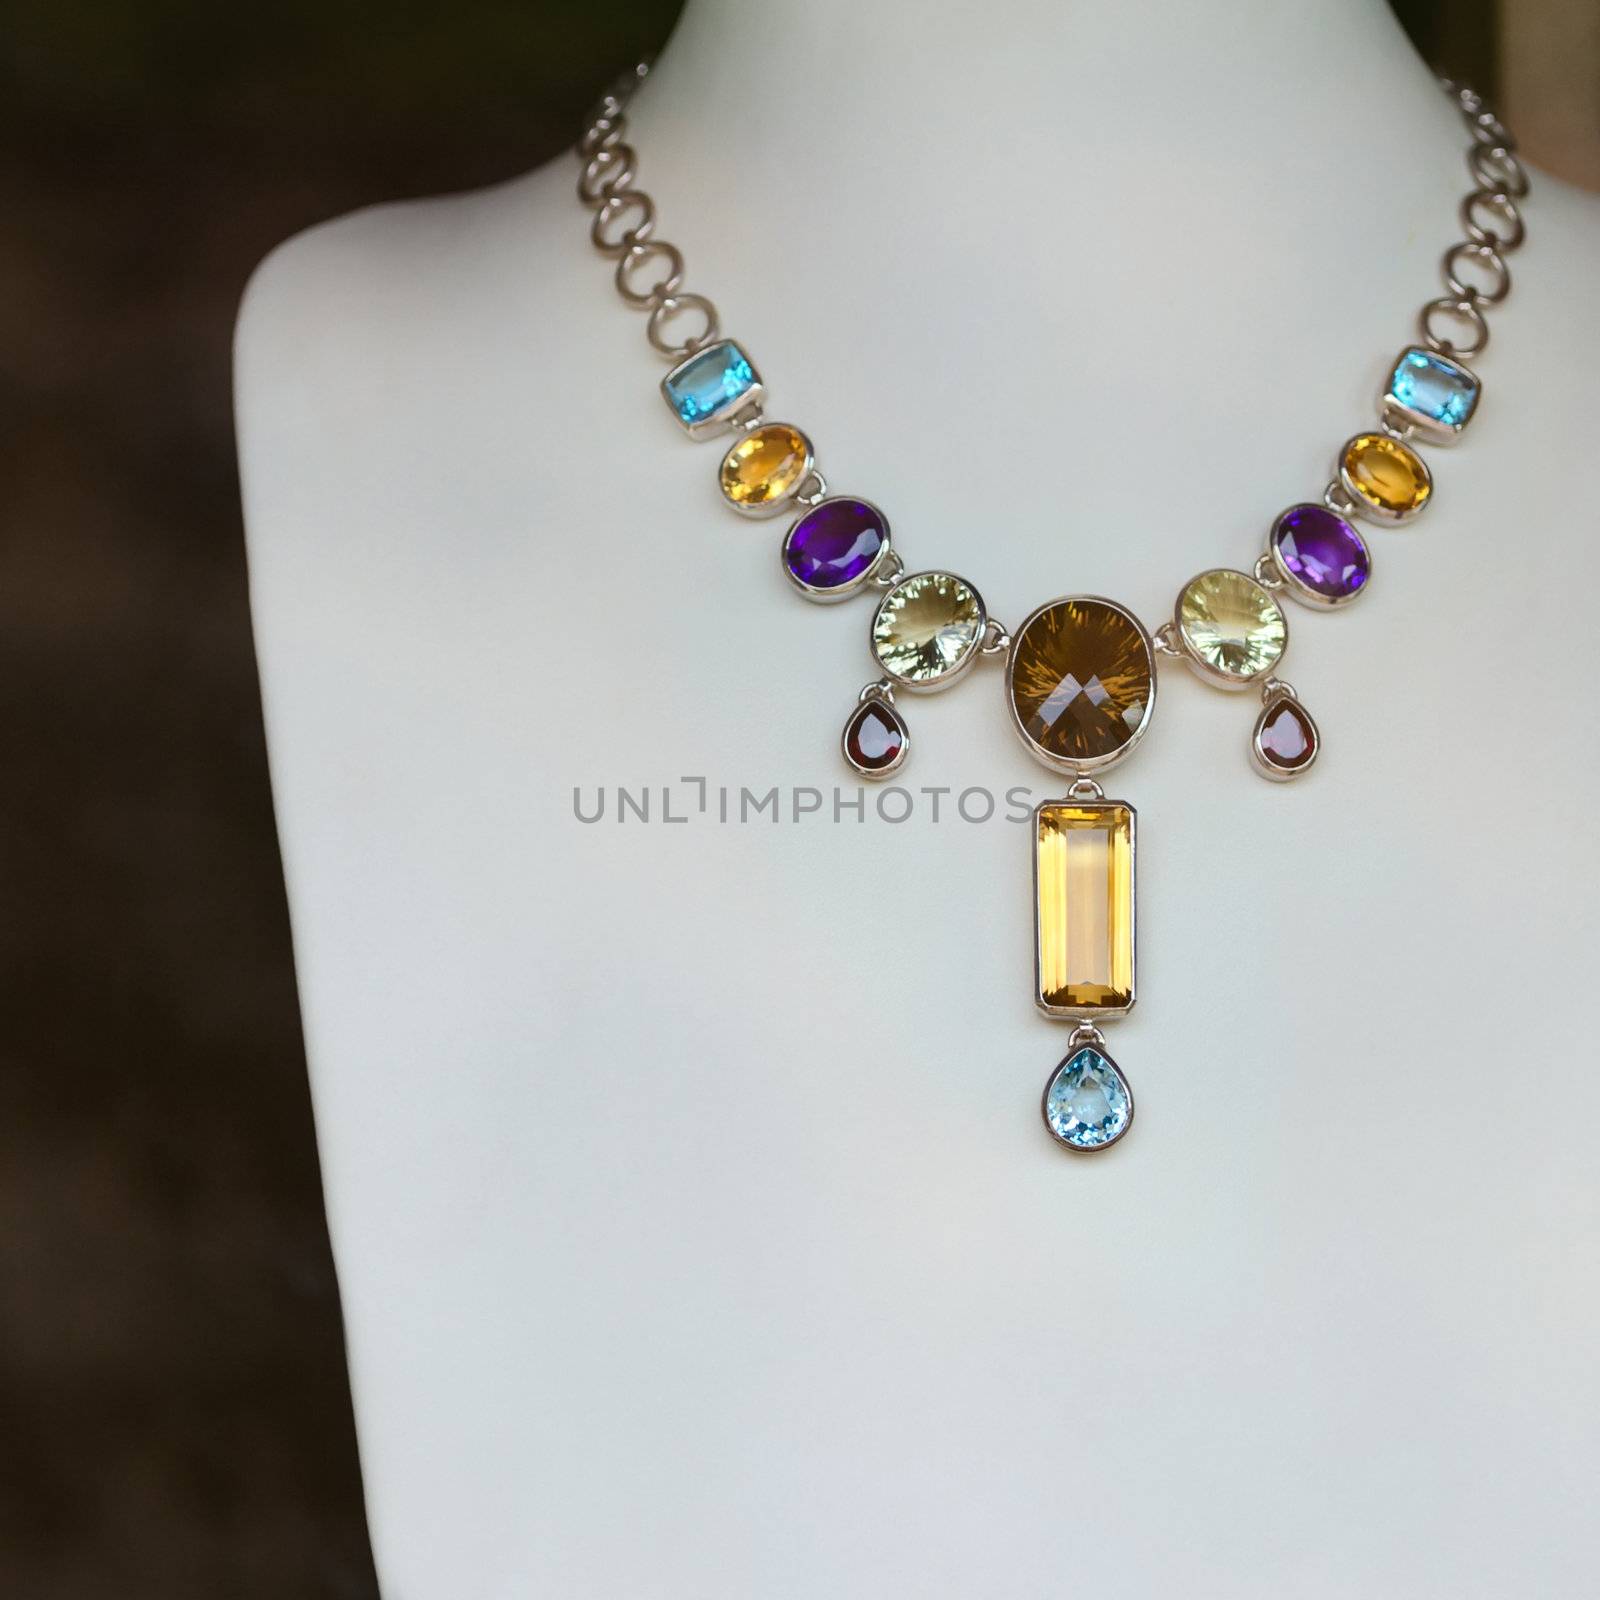 Necklace with many colored precious jewel (opals, sapphires), shallow depth of field